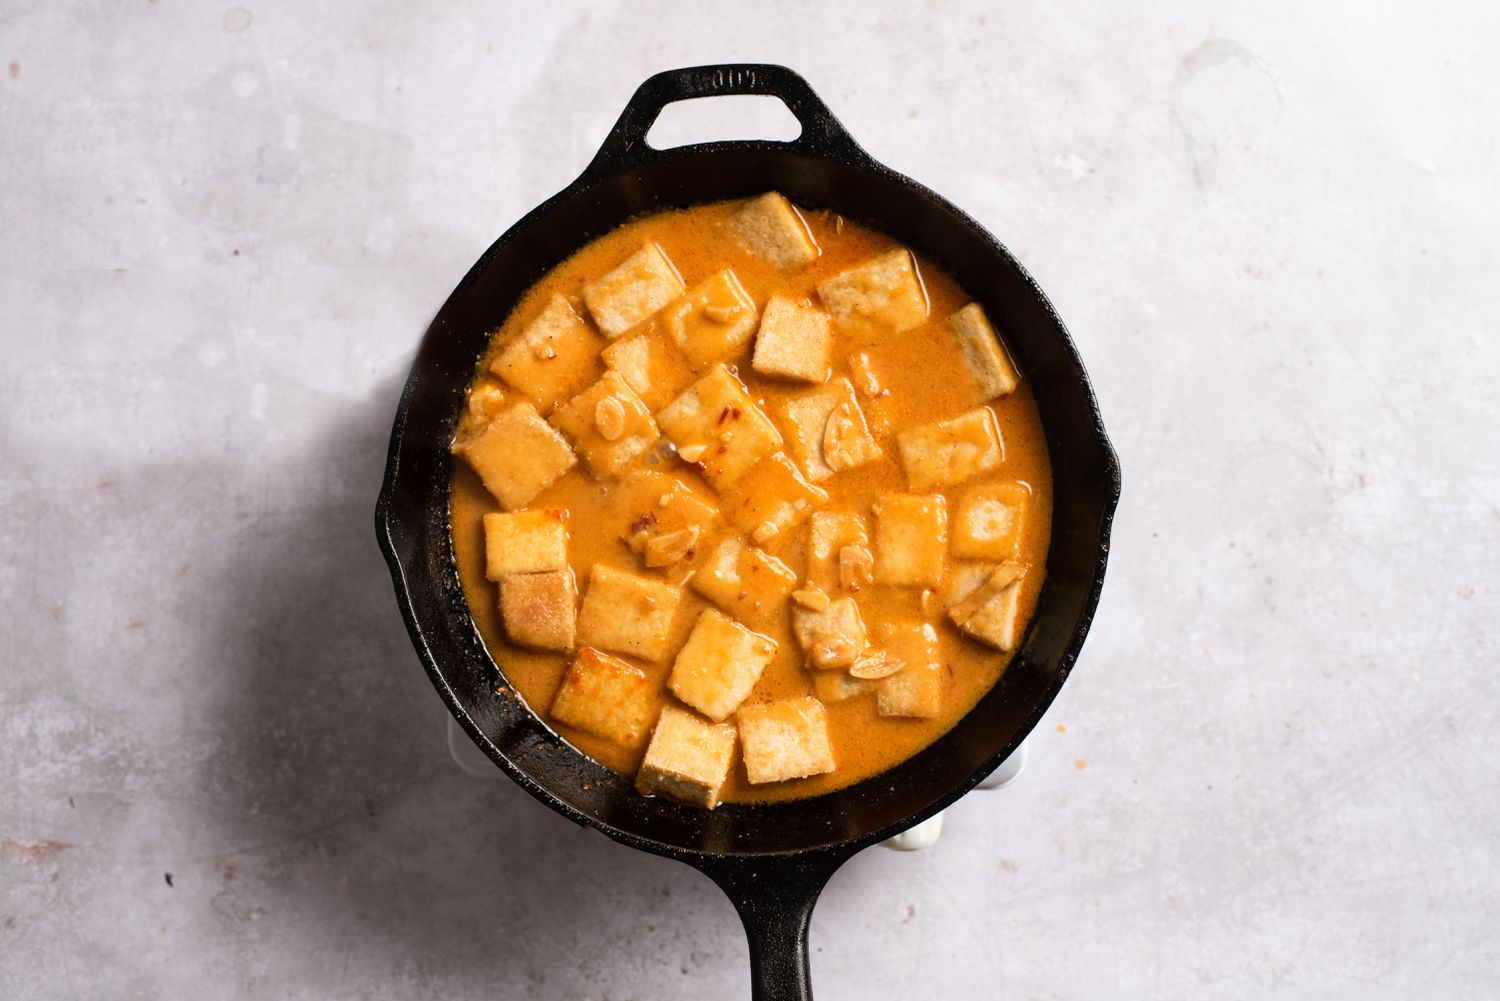 Tofu added to the pan, cooking in the miso-orange sauce